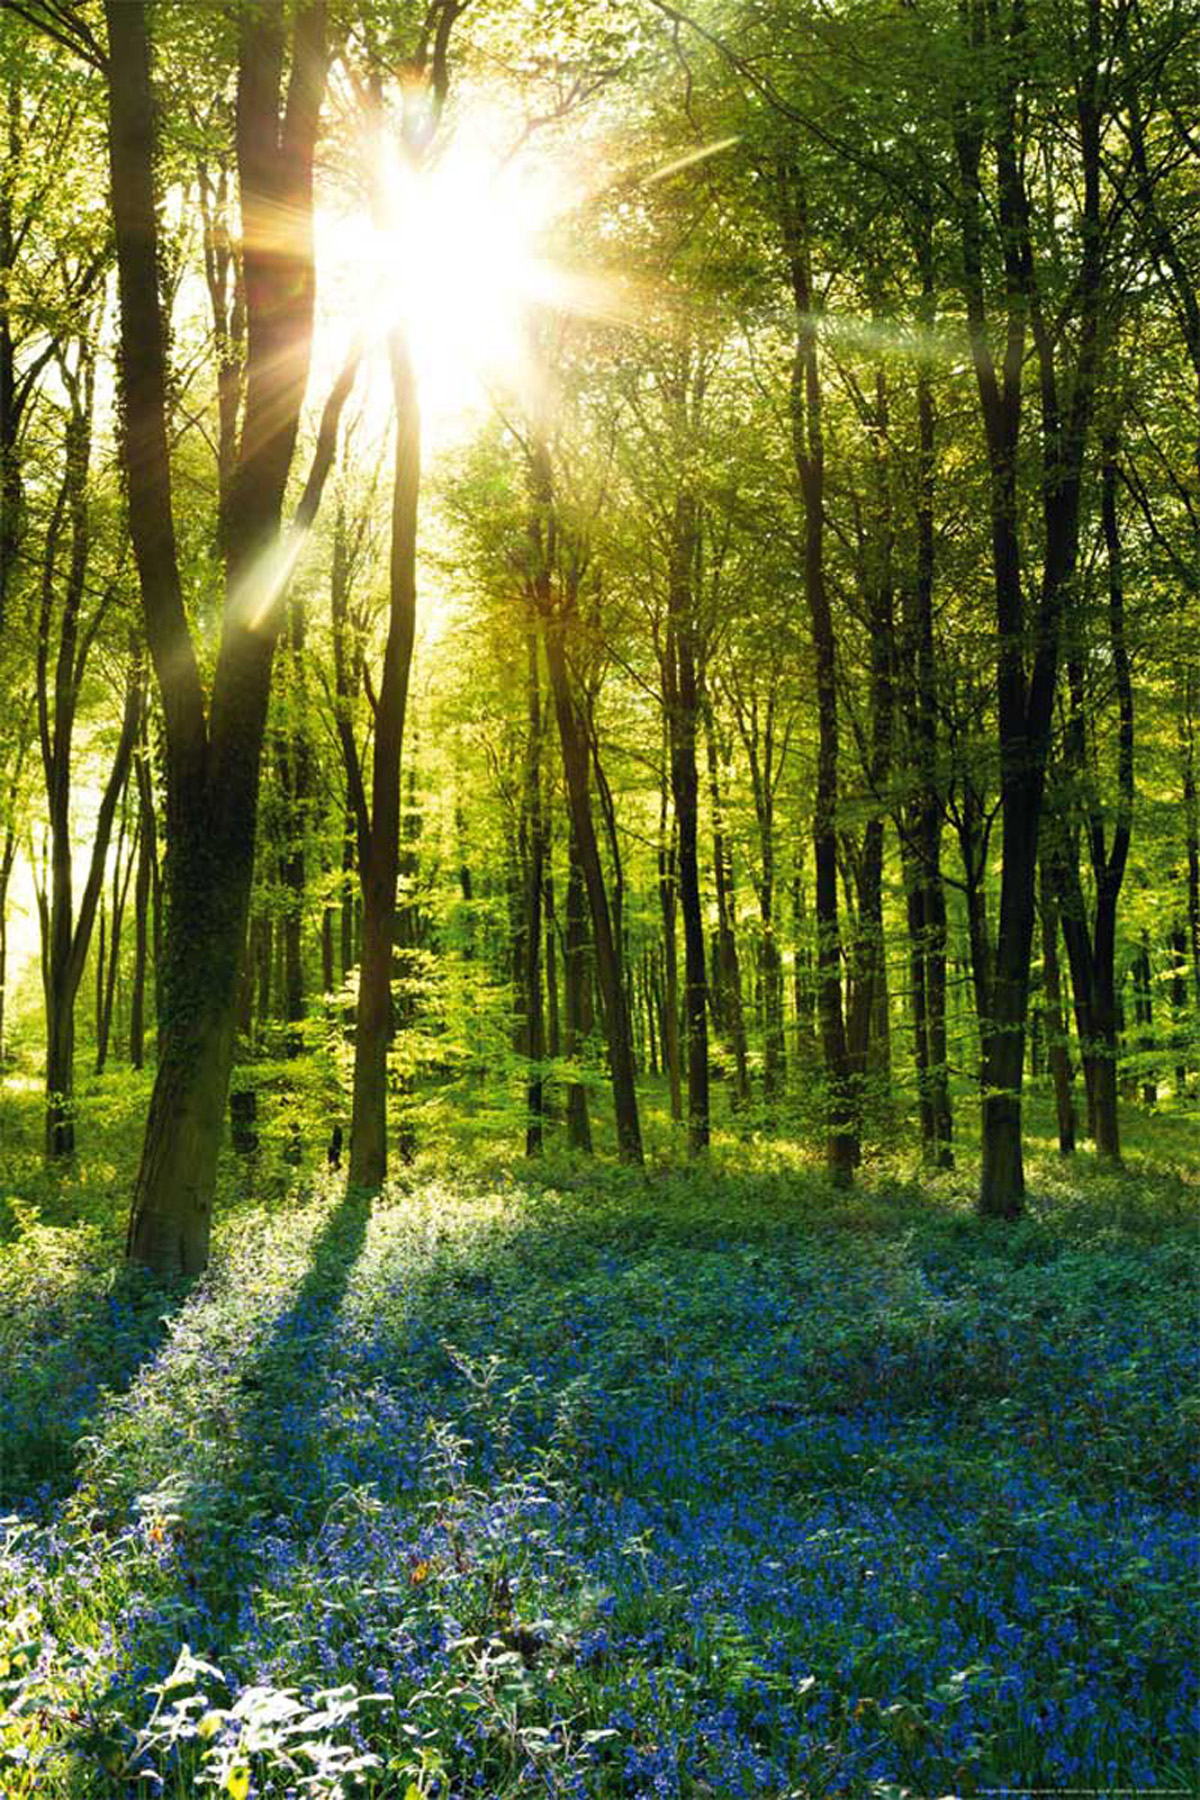 Bluebell Wood Sunrise - Forests